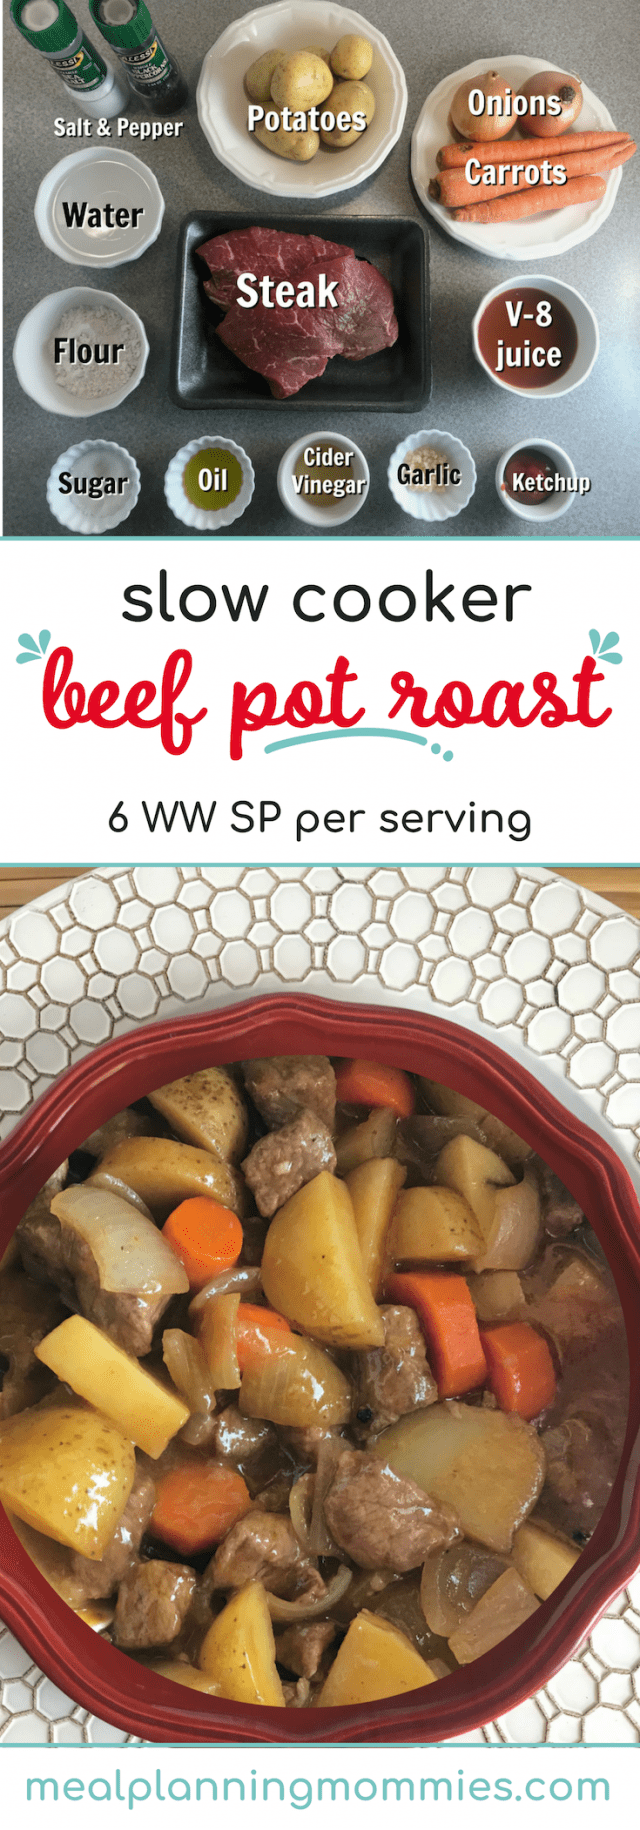 This beef pot roast takes steak, potatoes, carrots, and onions and slow cooks them in a tomato sauce until the meat and veggies are good and tender. It's a simple comfort food that is only 6 WW FreeStyle Smart Points per serving!